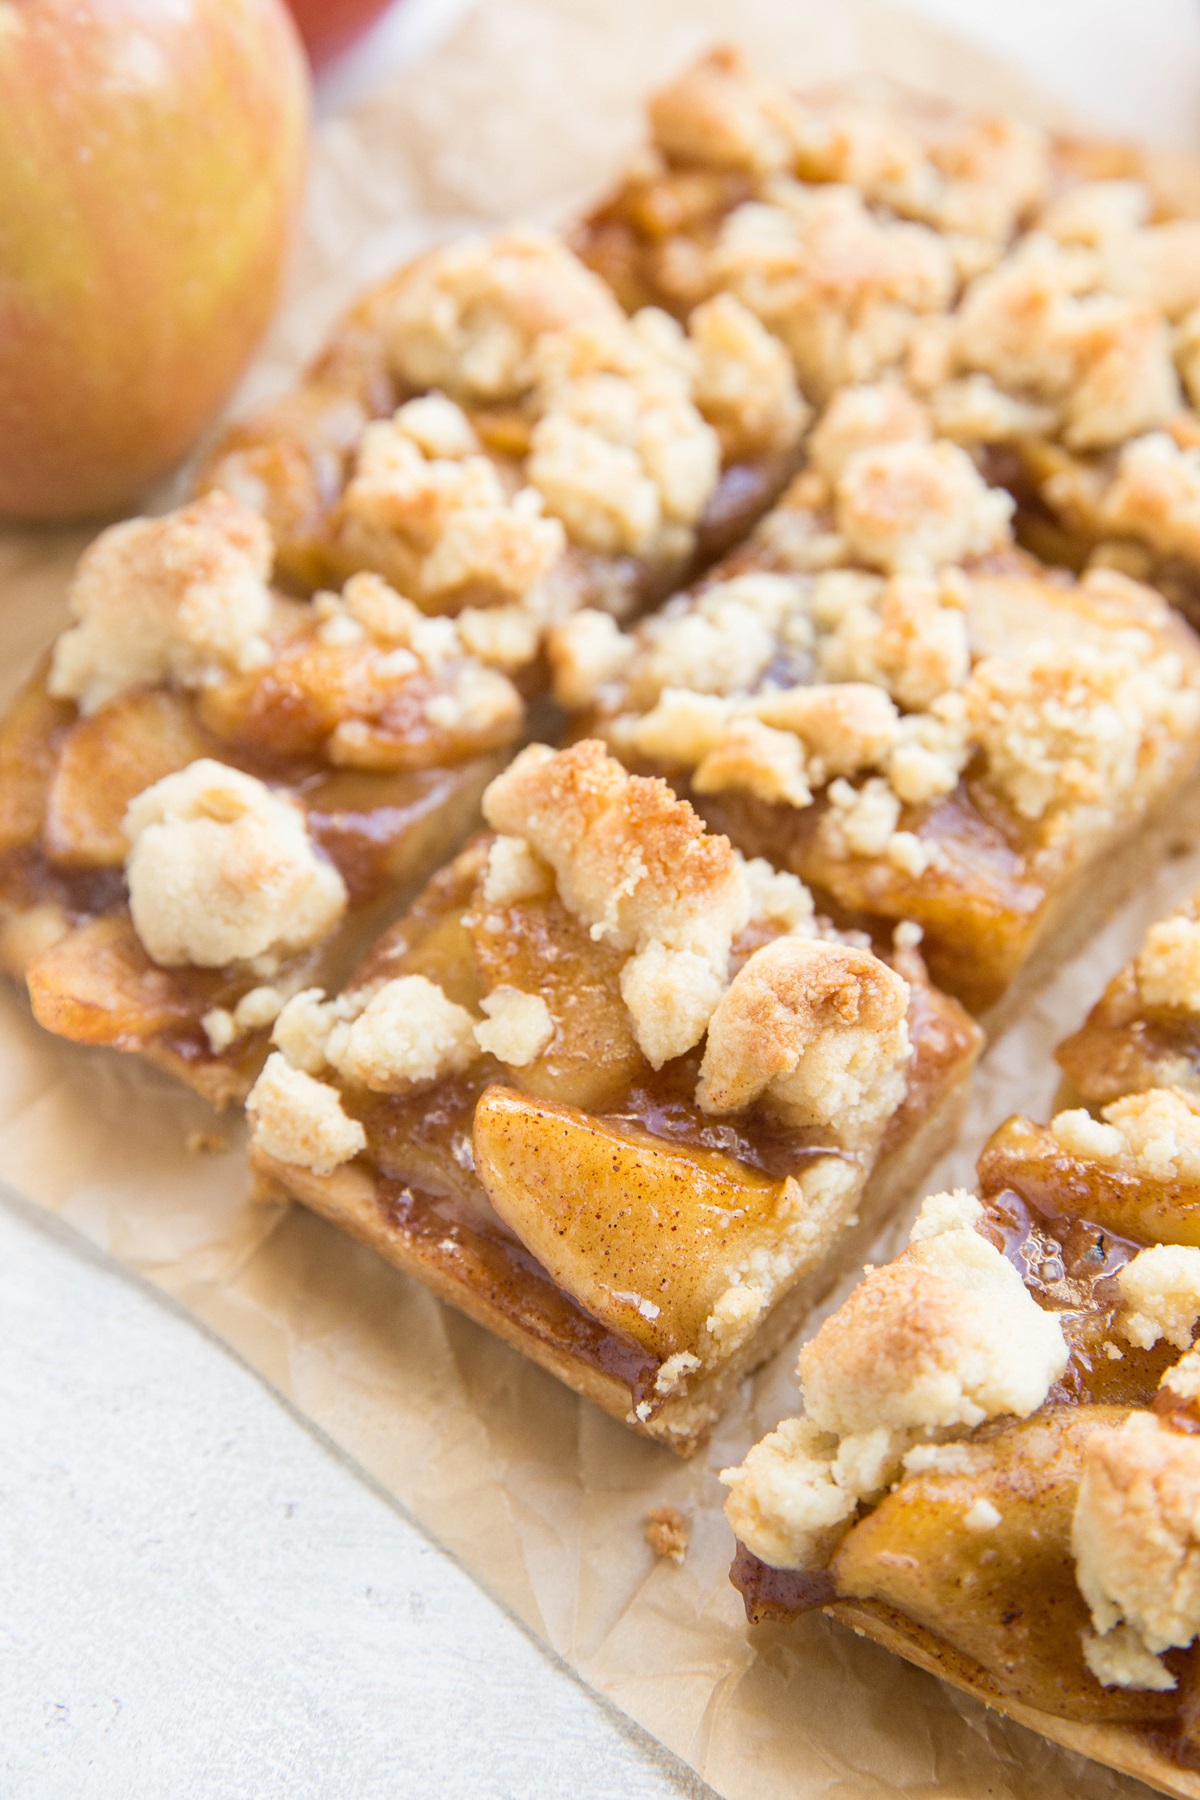 Paleo Apple Pie Bars made grain-free, refined sugar-free, dairy-free and vegan! Only 6 ingredients and so easy to make!